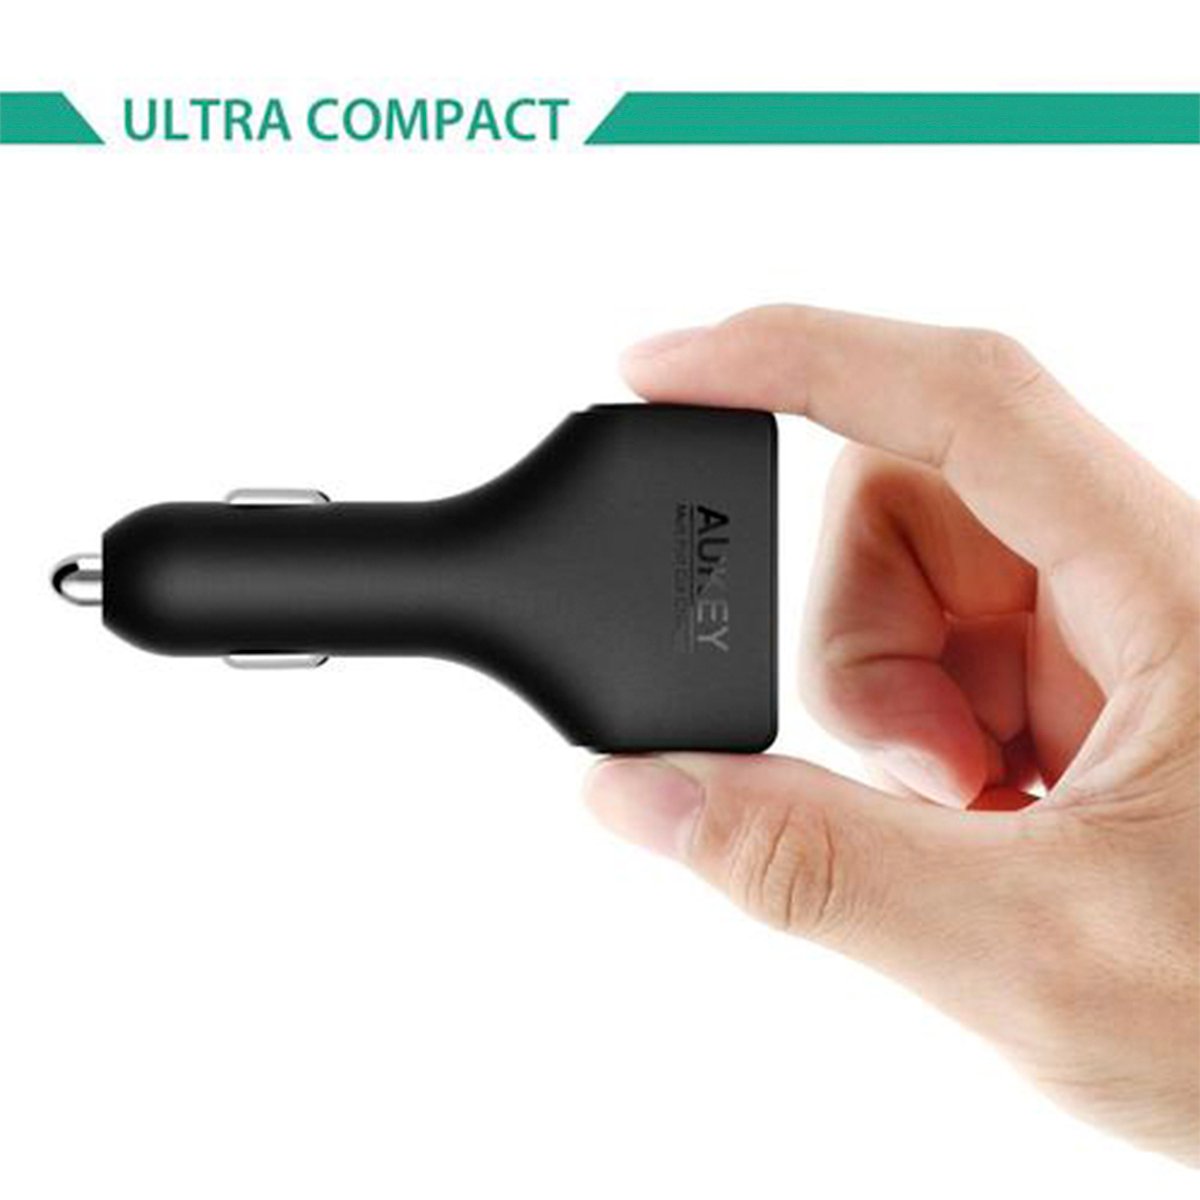 Aukey CC-T9 55.5W Qualcomm Quick Charge 3.0 4 Ports USB Car Charger(AKY-CCT9-4P-55W)